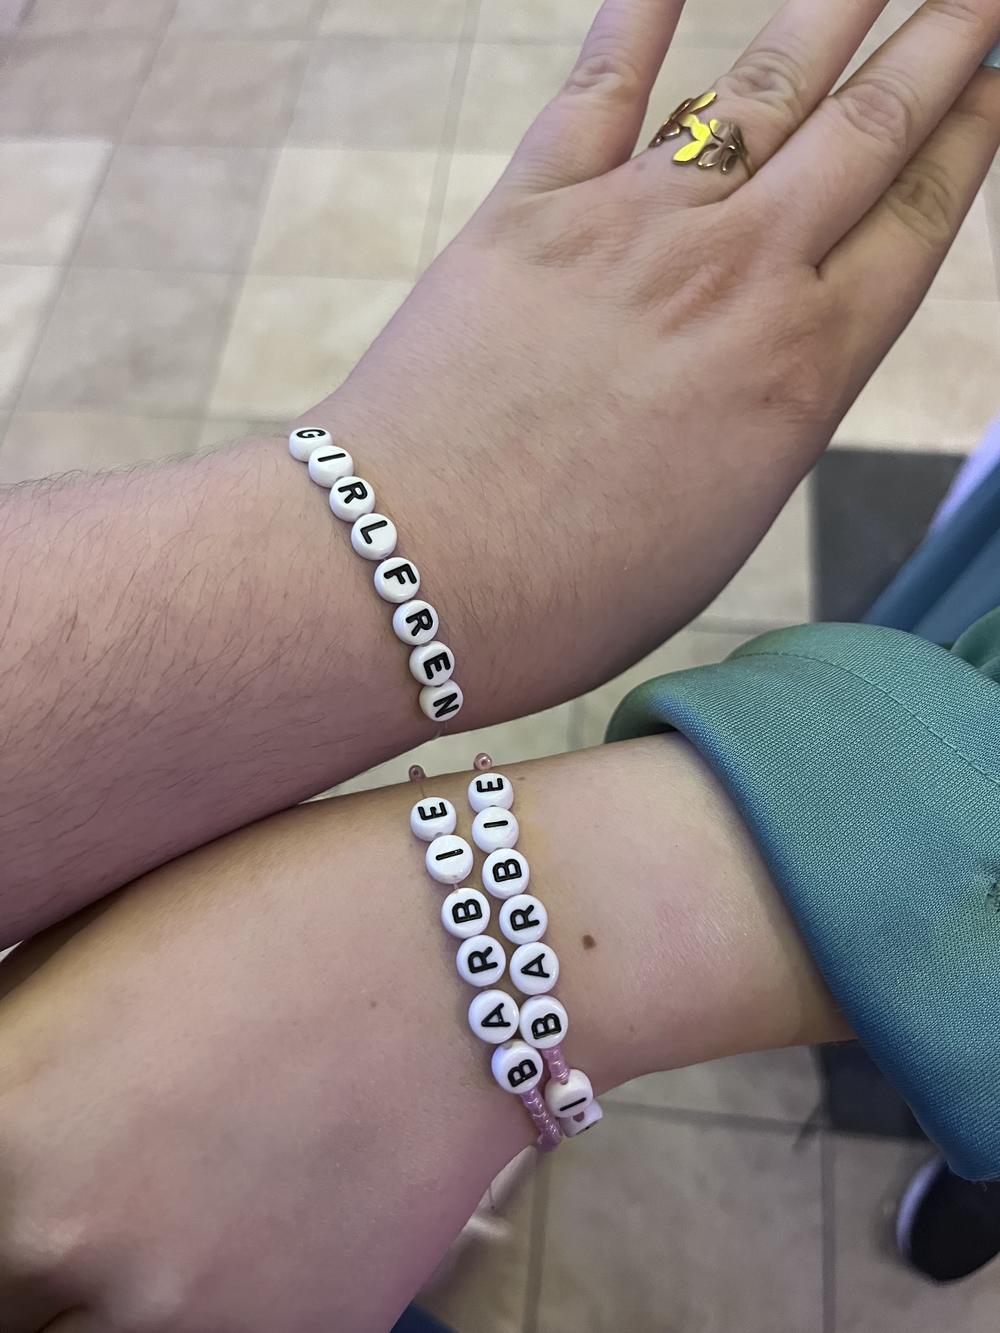 Mishaela Robison and Margaret Murphy made <em></em>Barbenheimer-themed friendship bracelets to give out at the theater in a nod to another cultural phenomenon, Taylor Swift's Eras Tour.